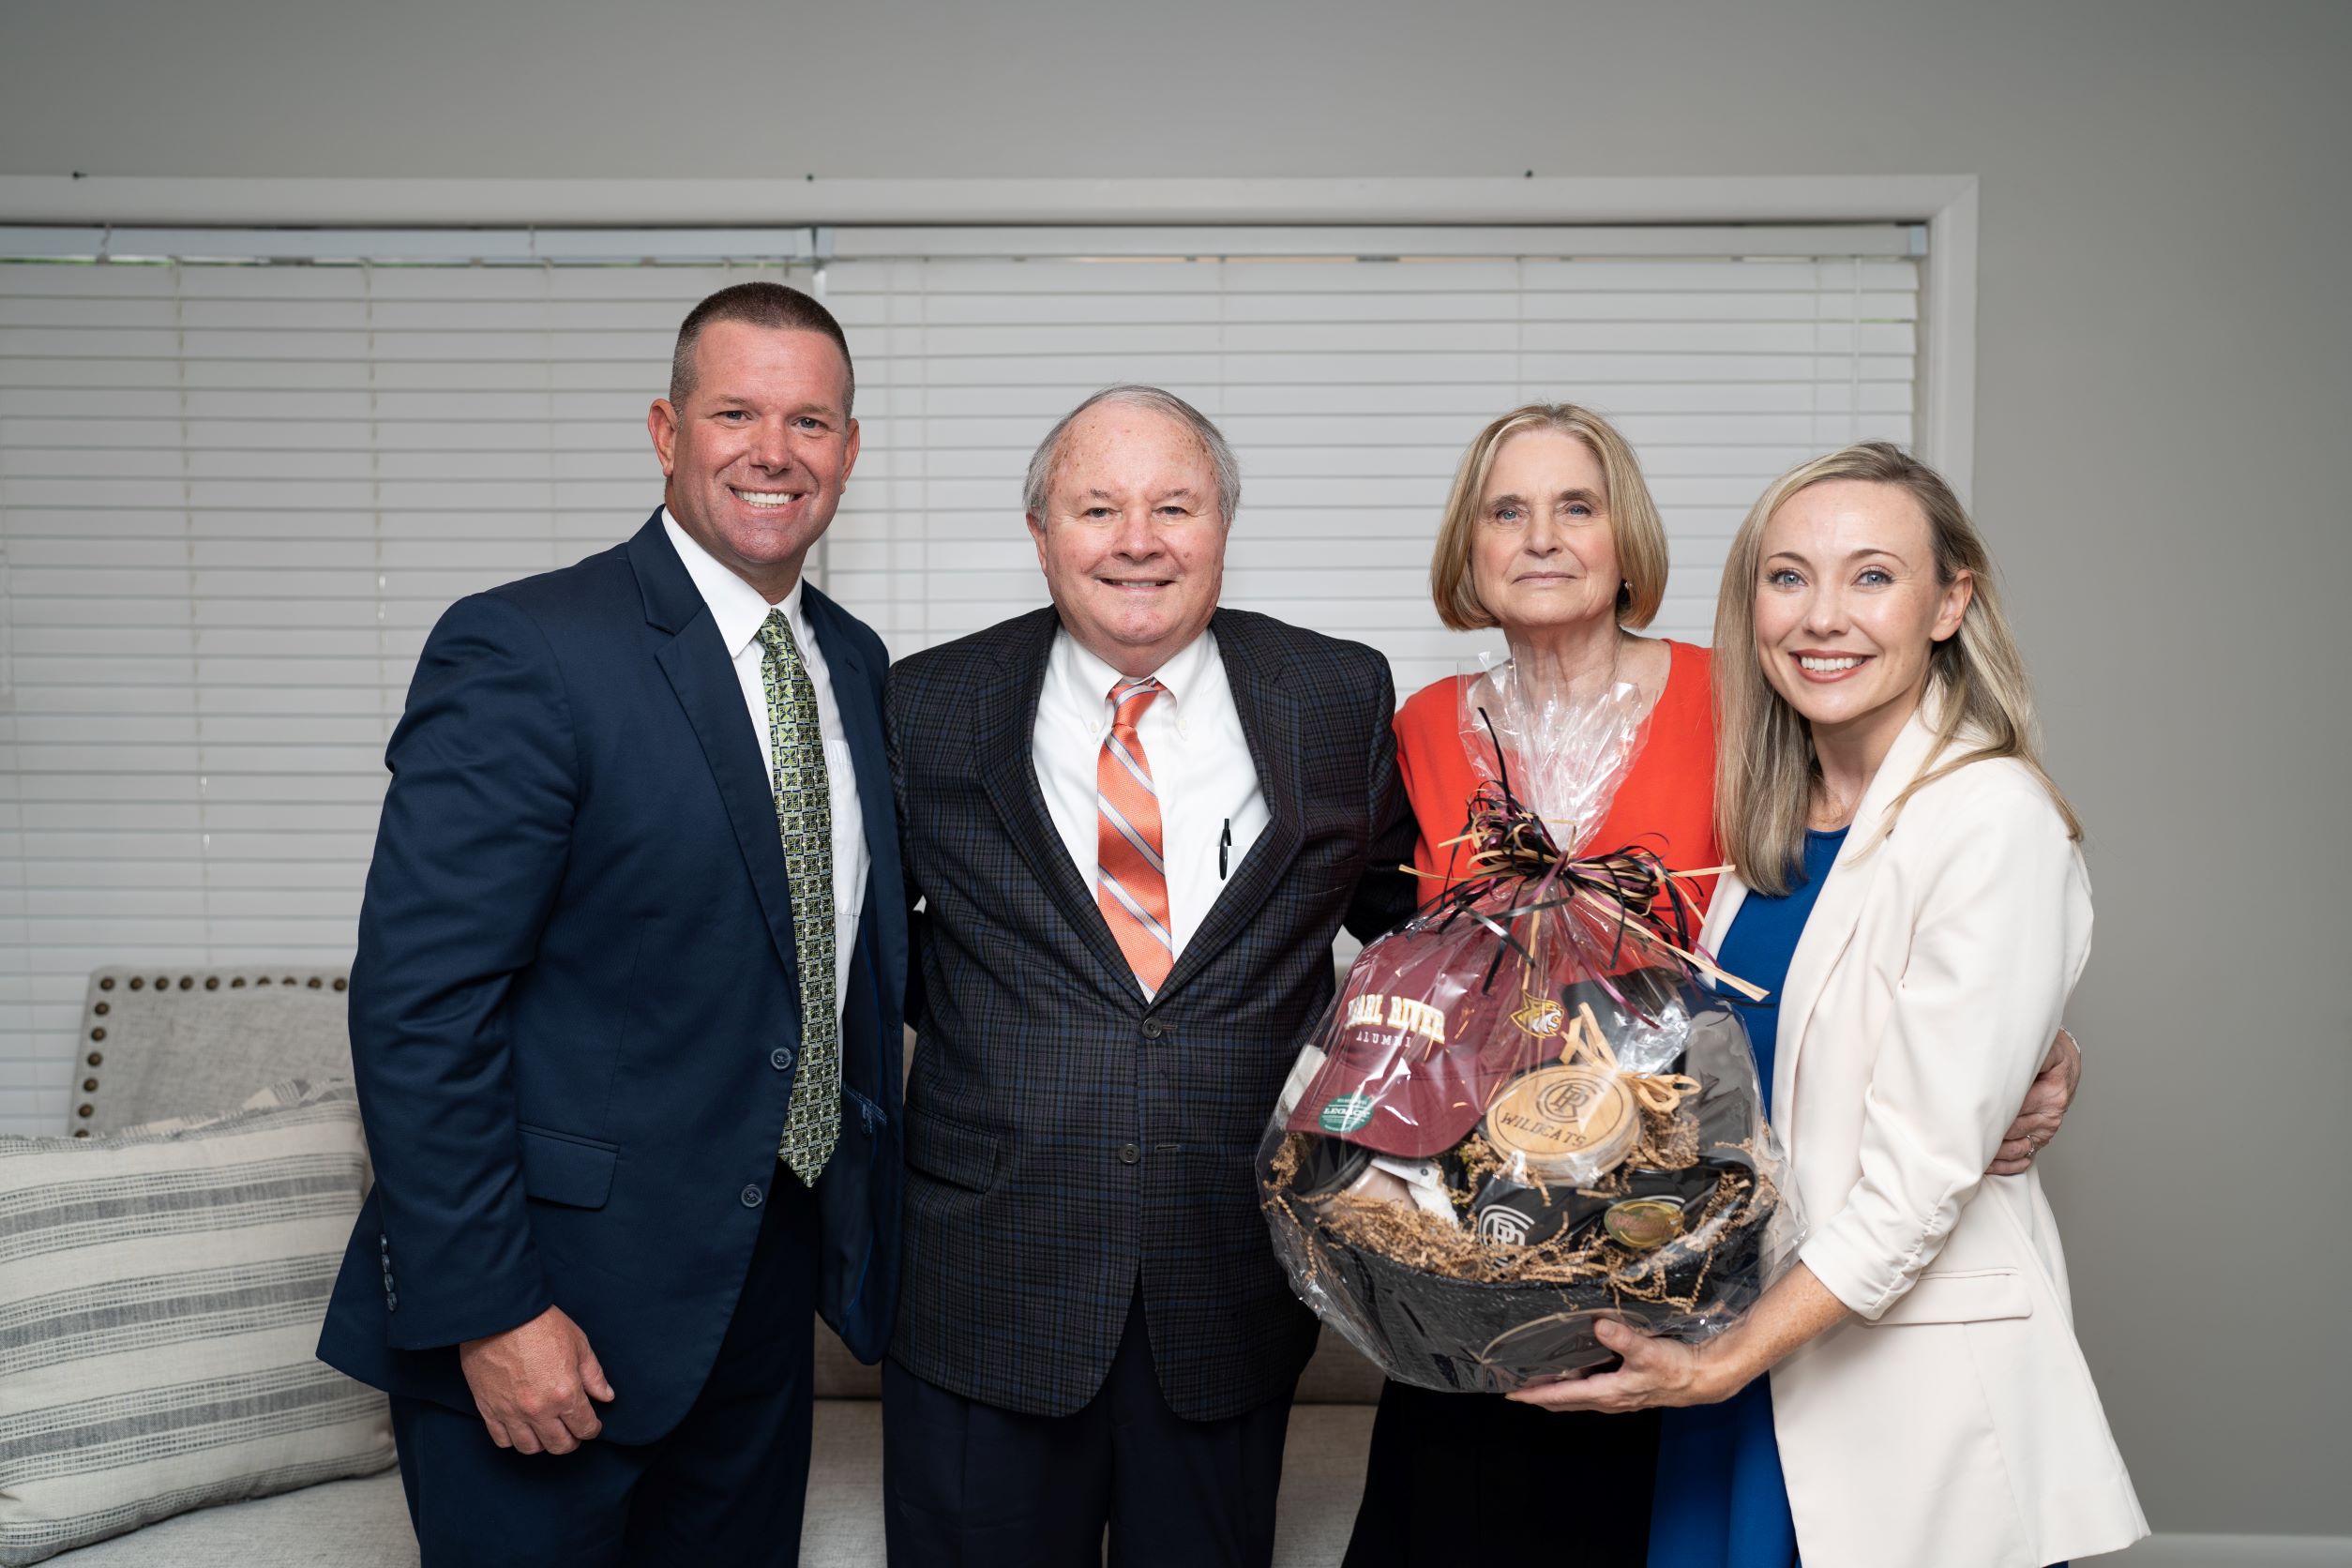 Bourgeois family recognized for donation to PRCC Foundation June 2022 with gift basket of PRCC branded merchandise